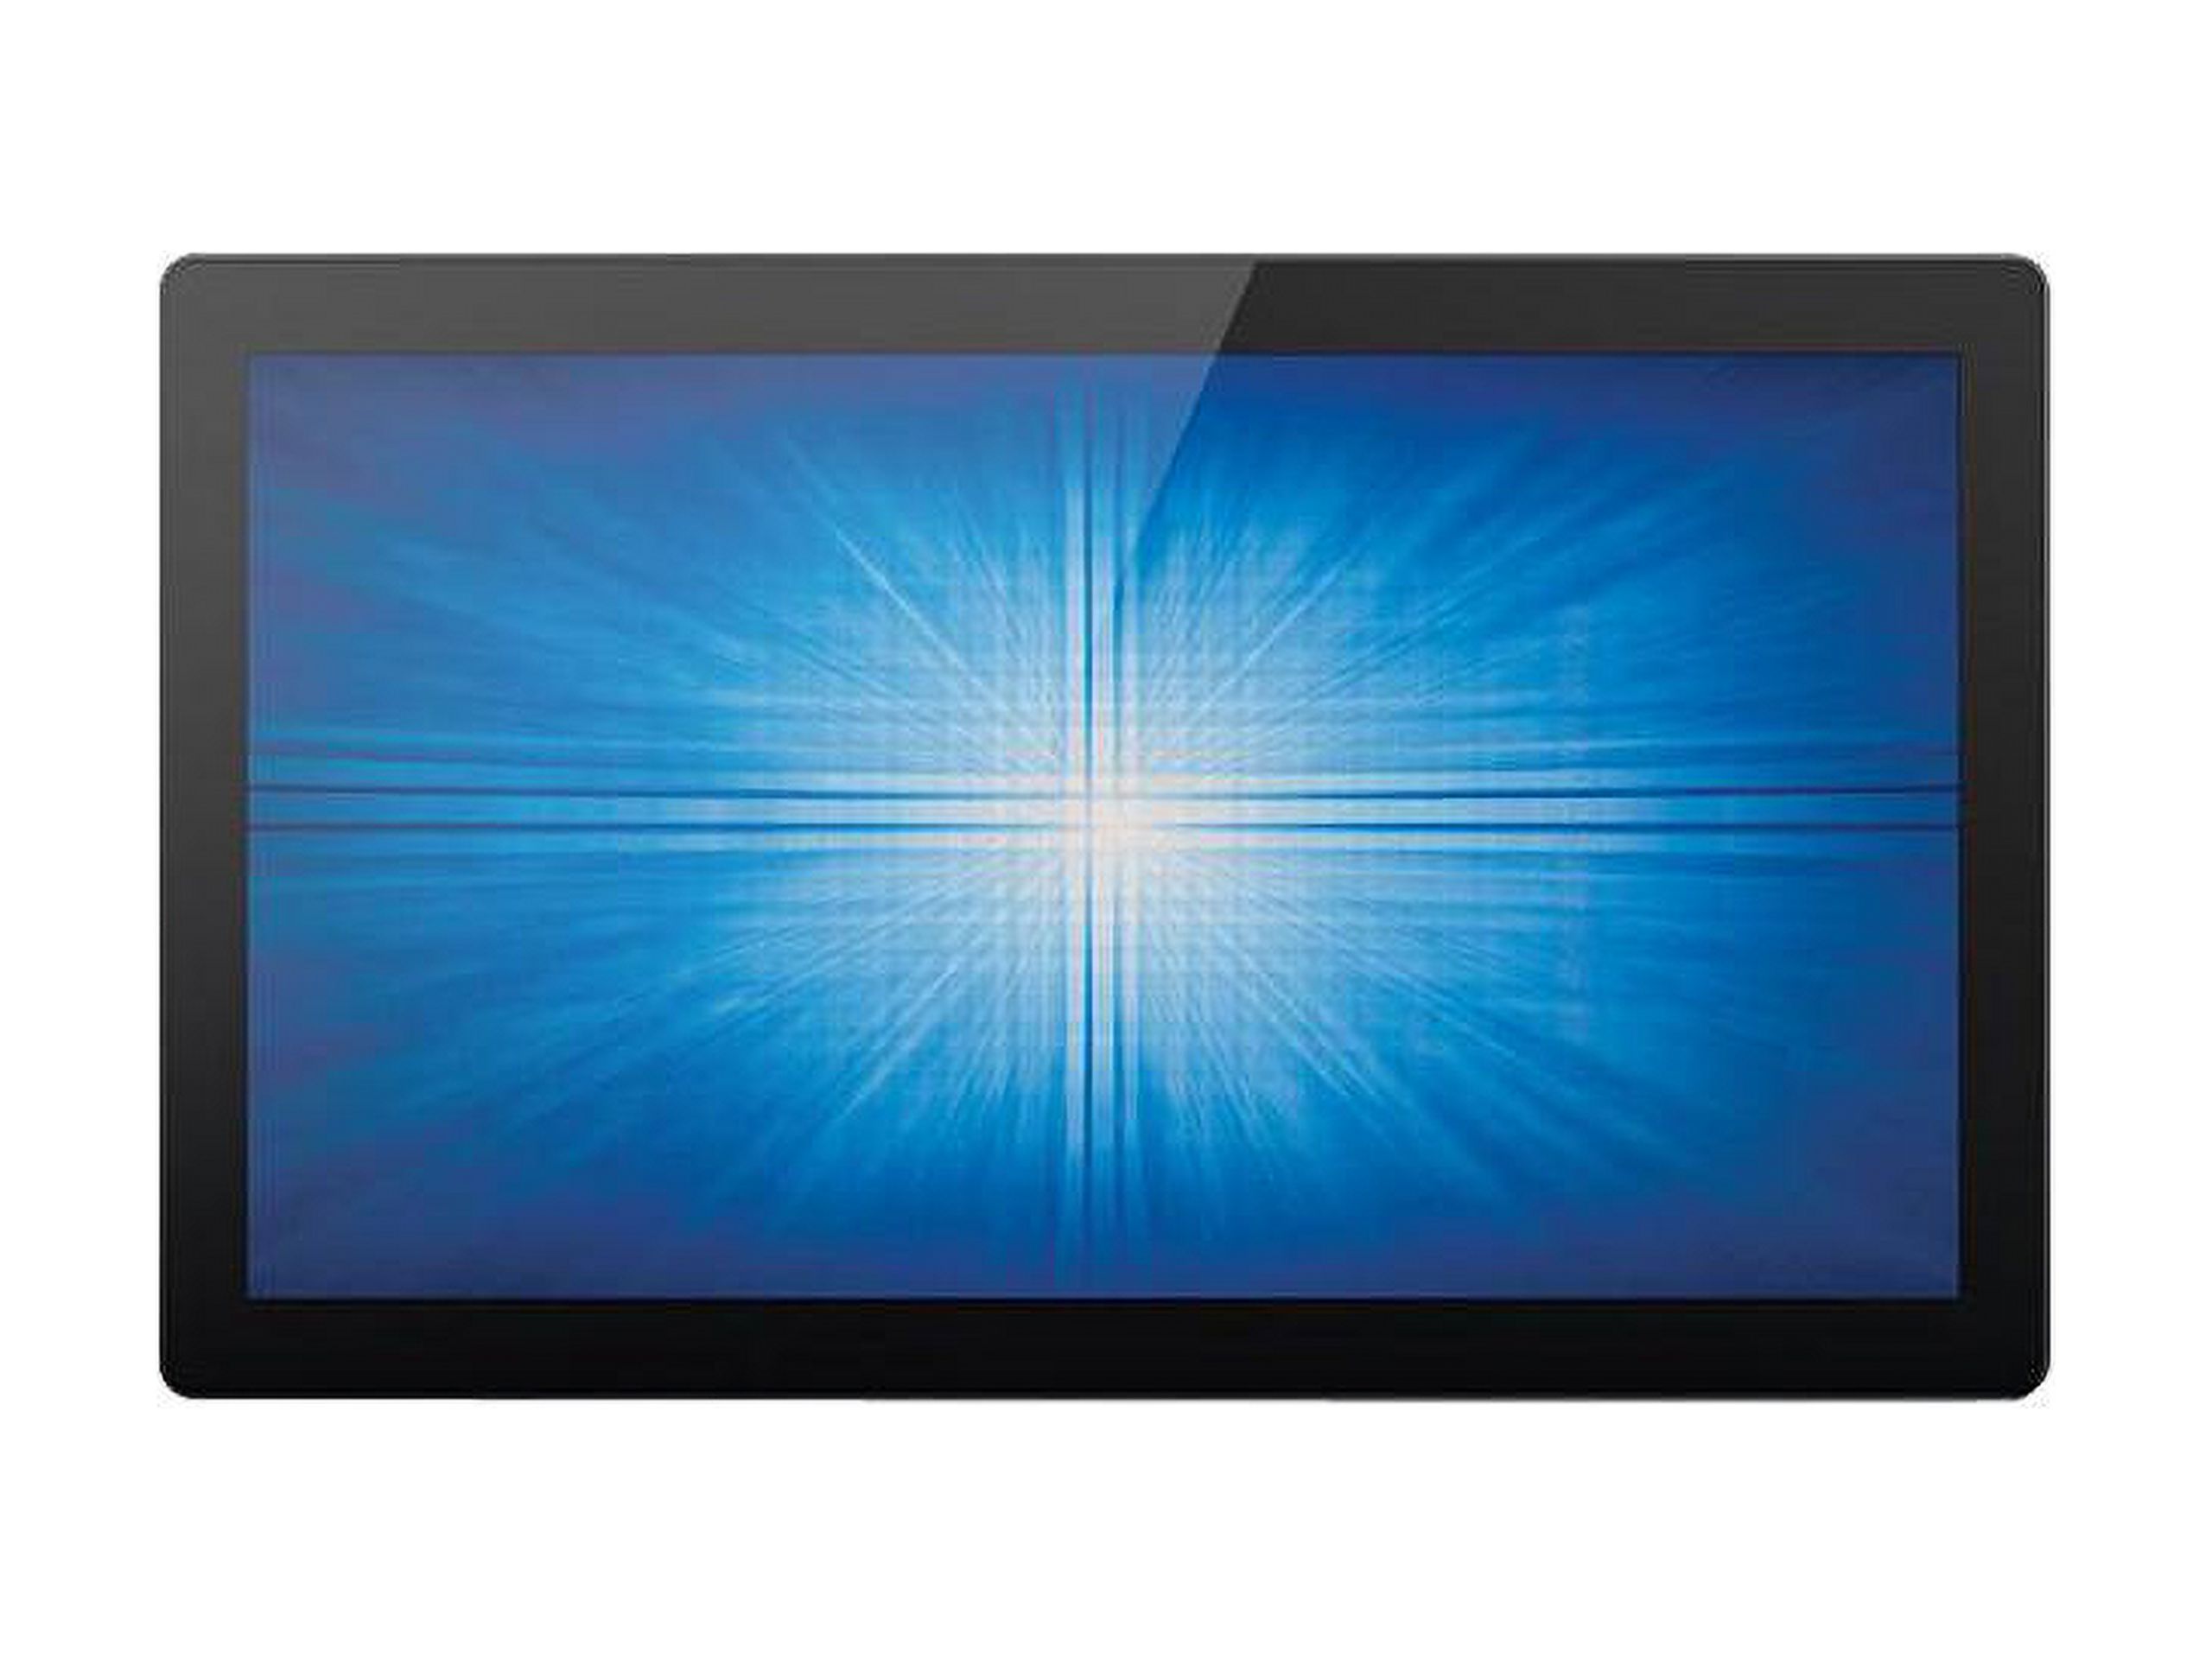 Elo 2294L 21.5" Open-frame LCD Touchscreen Monitor - 16:9 - 14 ms - image 1 of 5